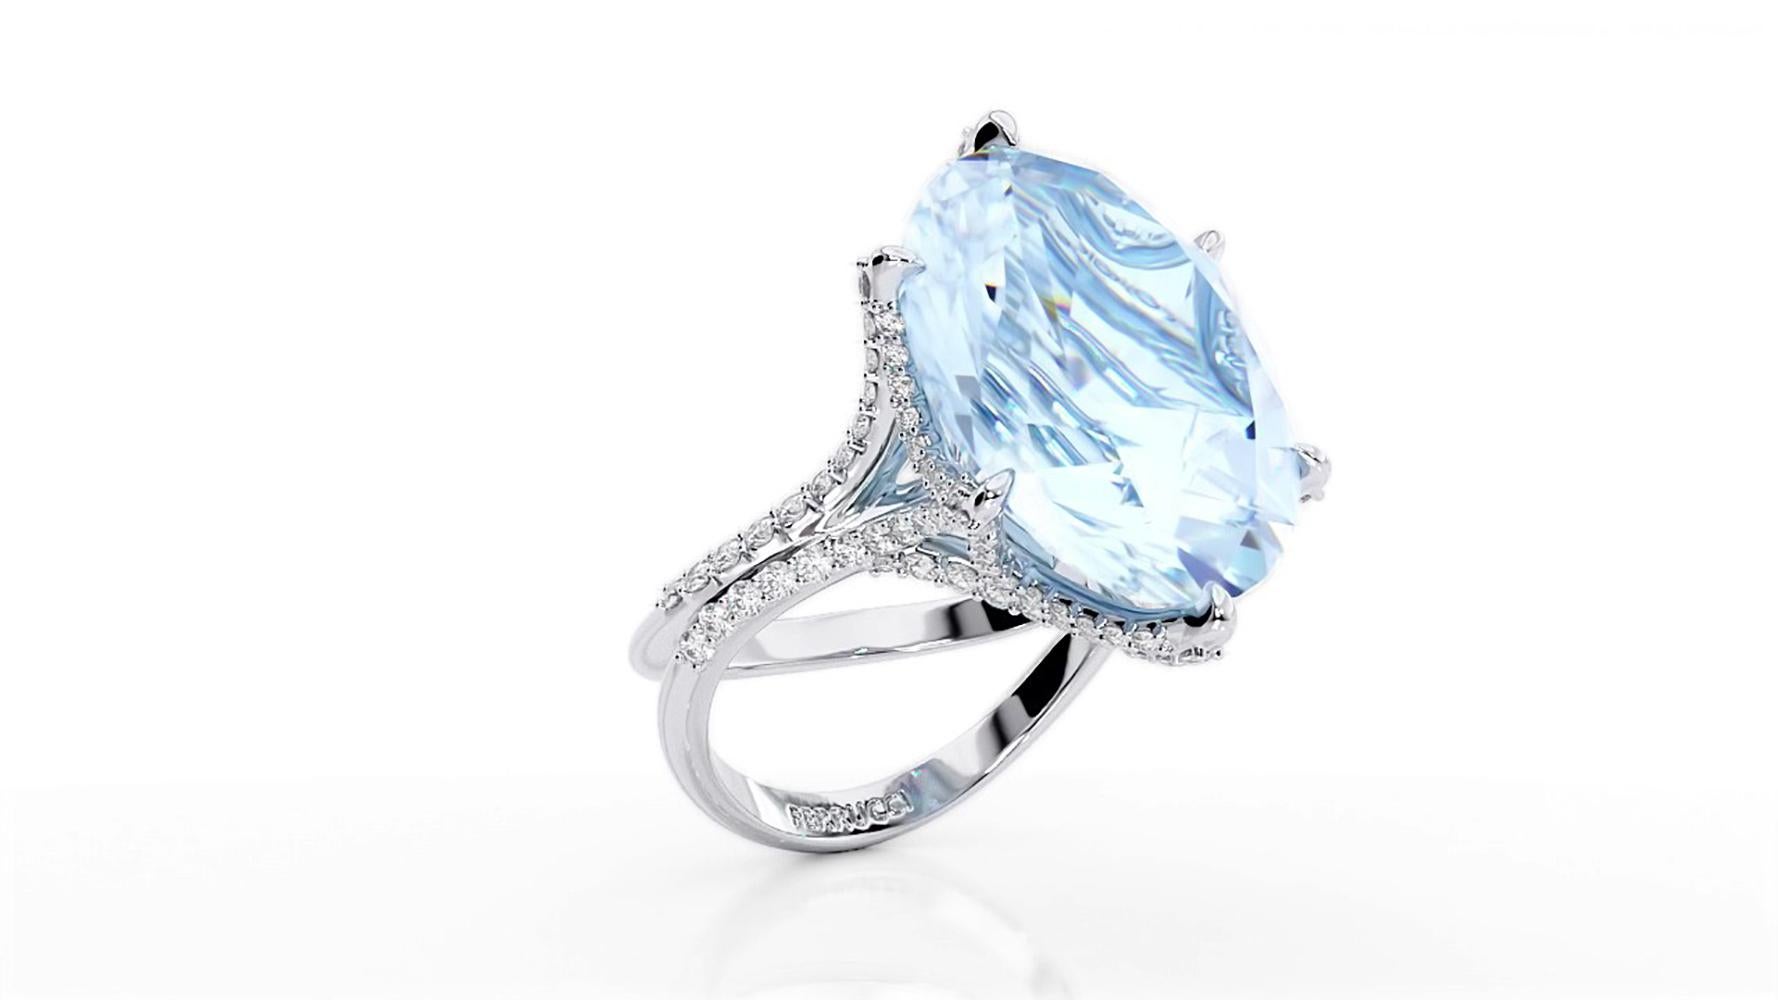  13.05 carat Oval Aquamarine, set in a uniquely designed  18k white gold ring with white diamonds pave' all over the surface of the ring creating an effect of morning dew, for an approximate carat weight of 0.78 carat, conceived with the best